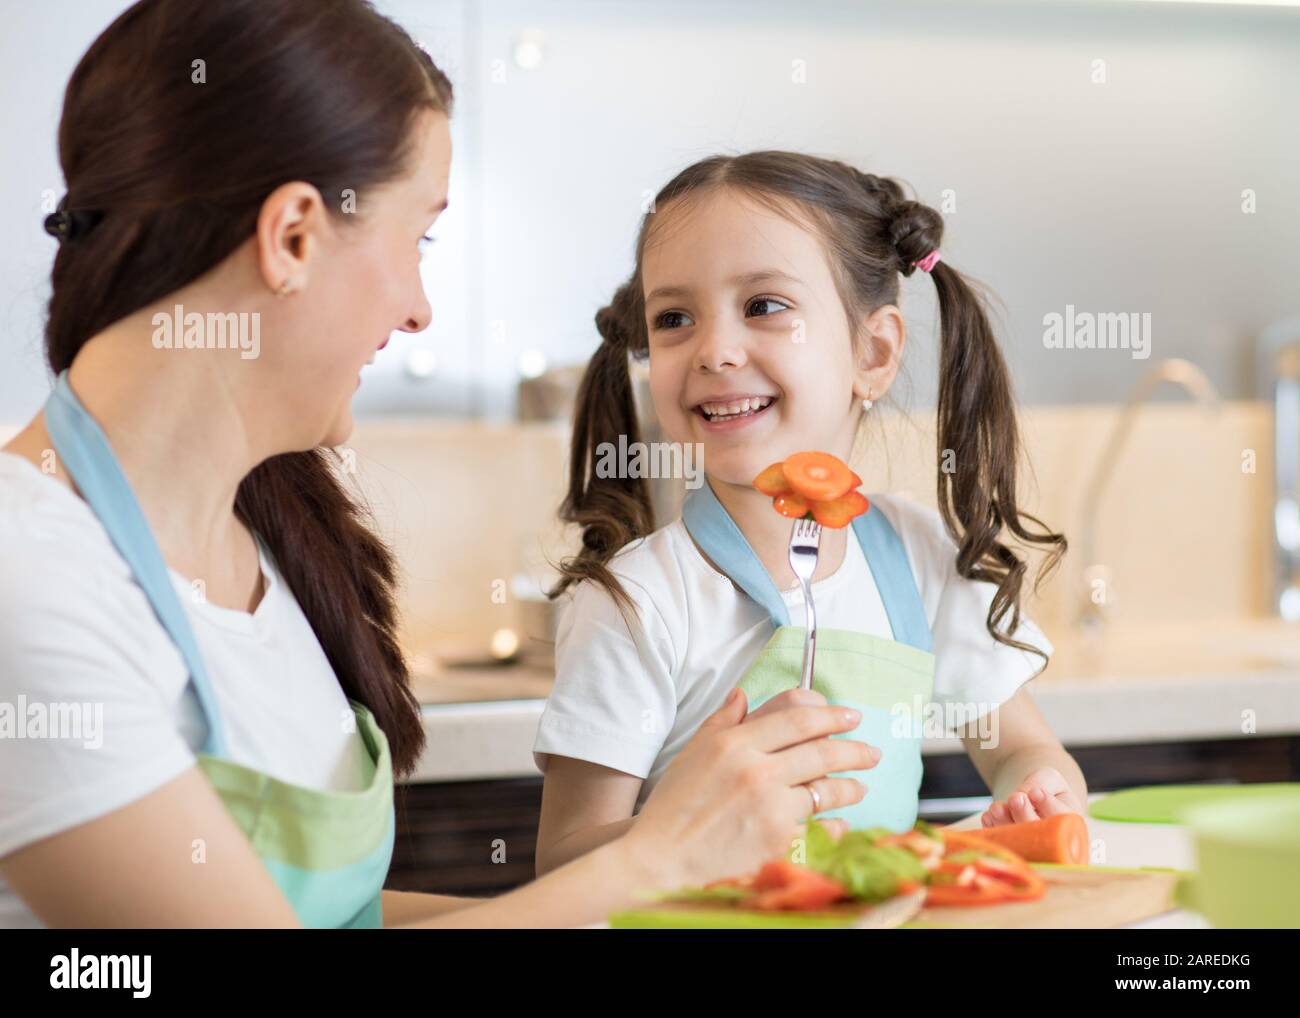 Child cooking with her mother in kitchen Stock Photo